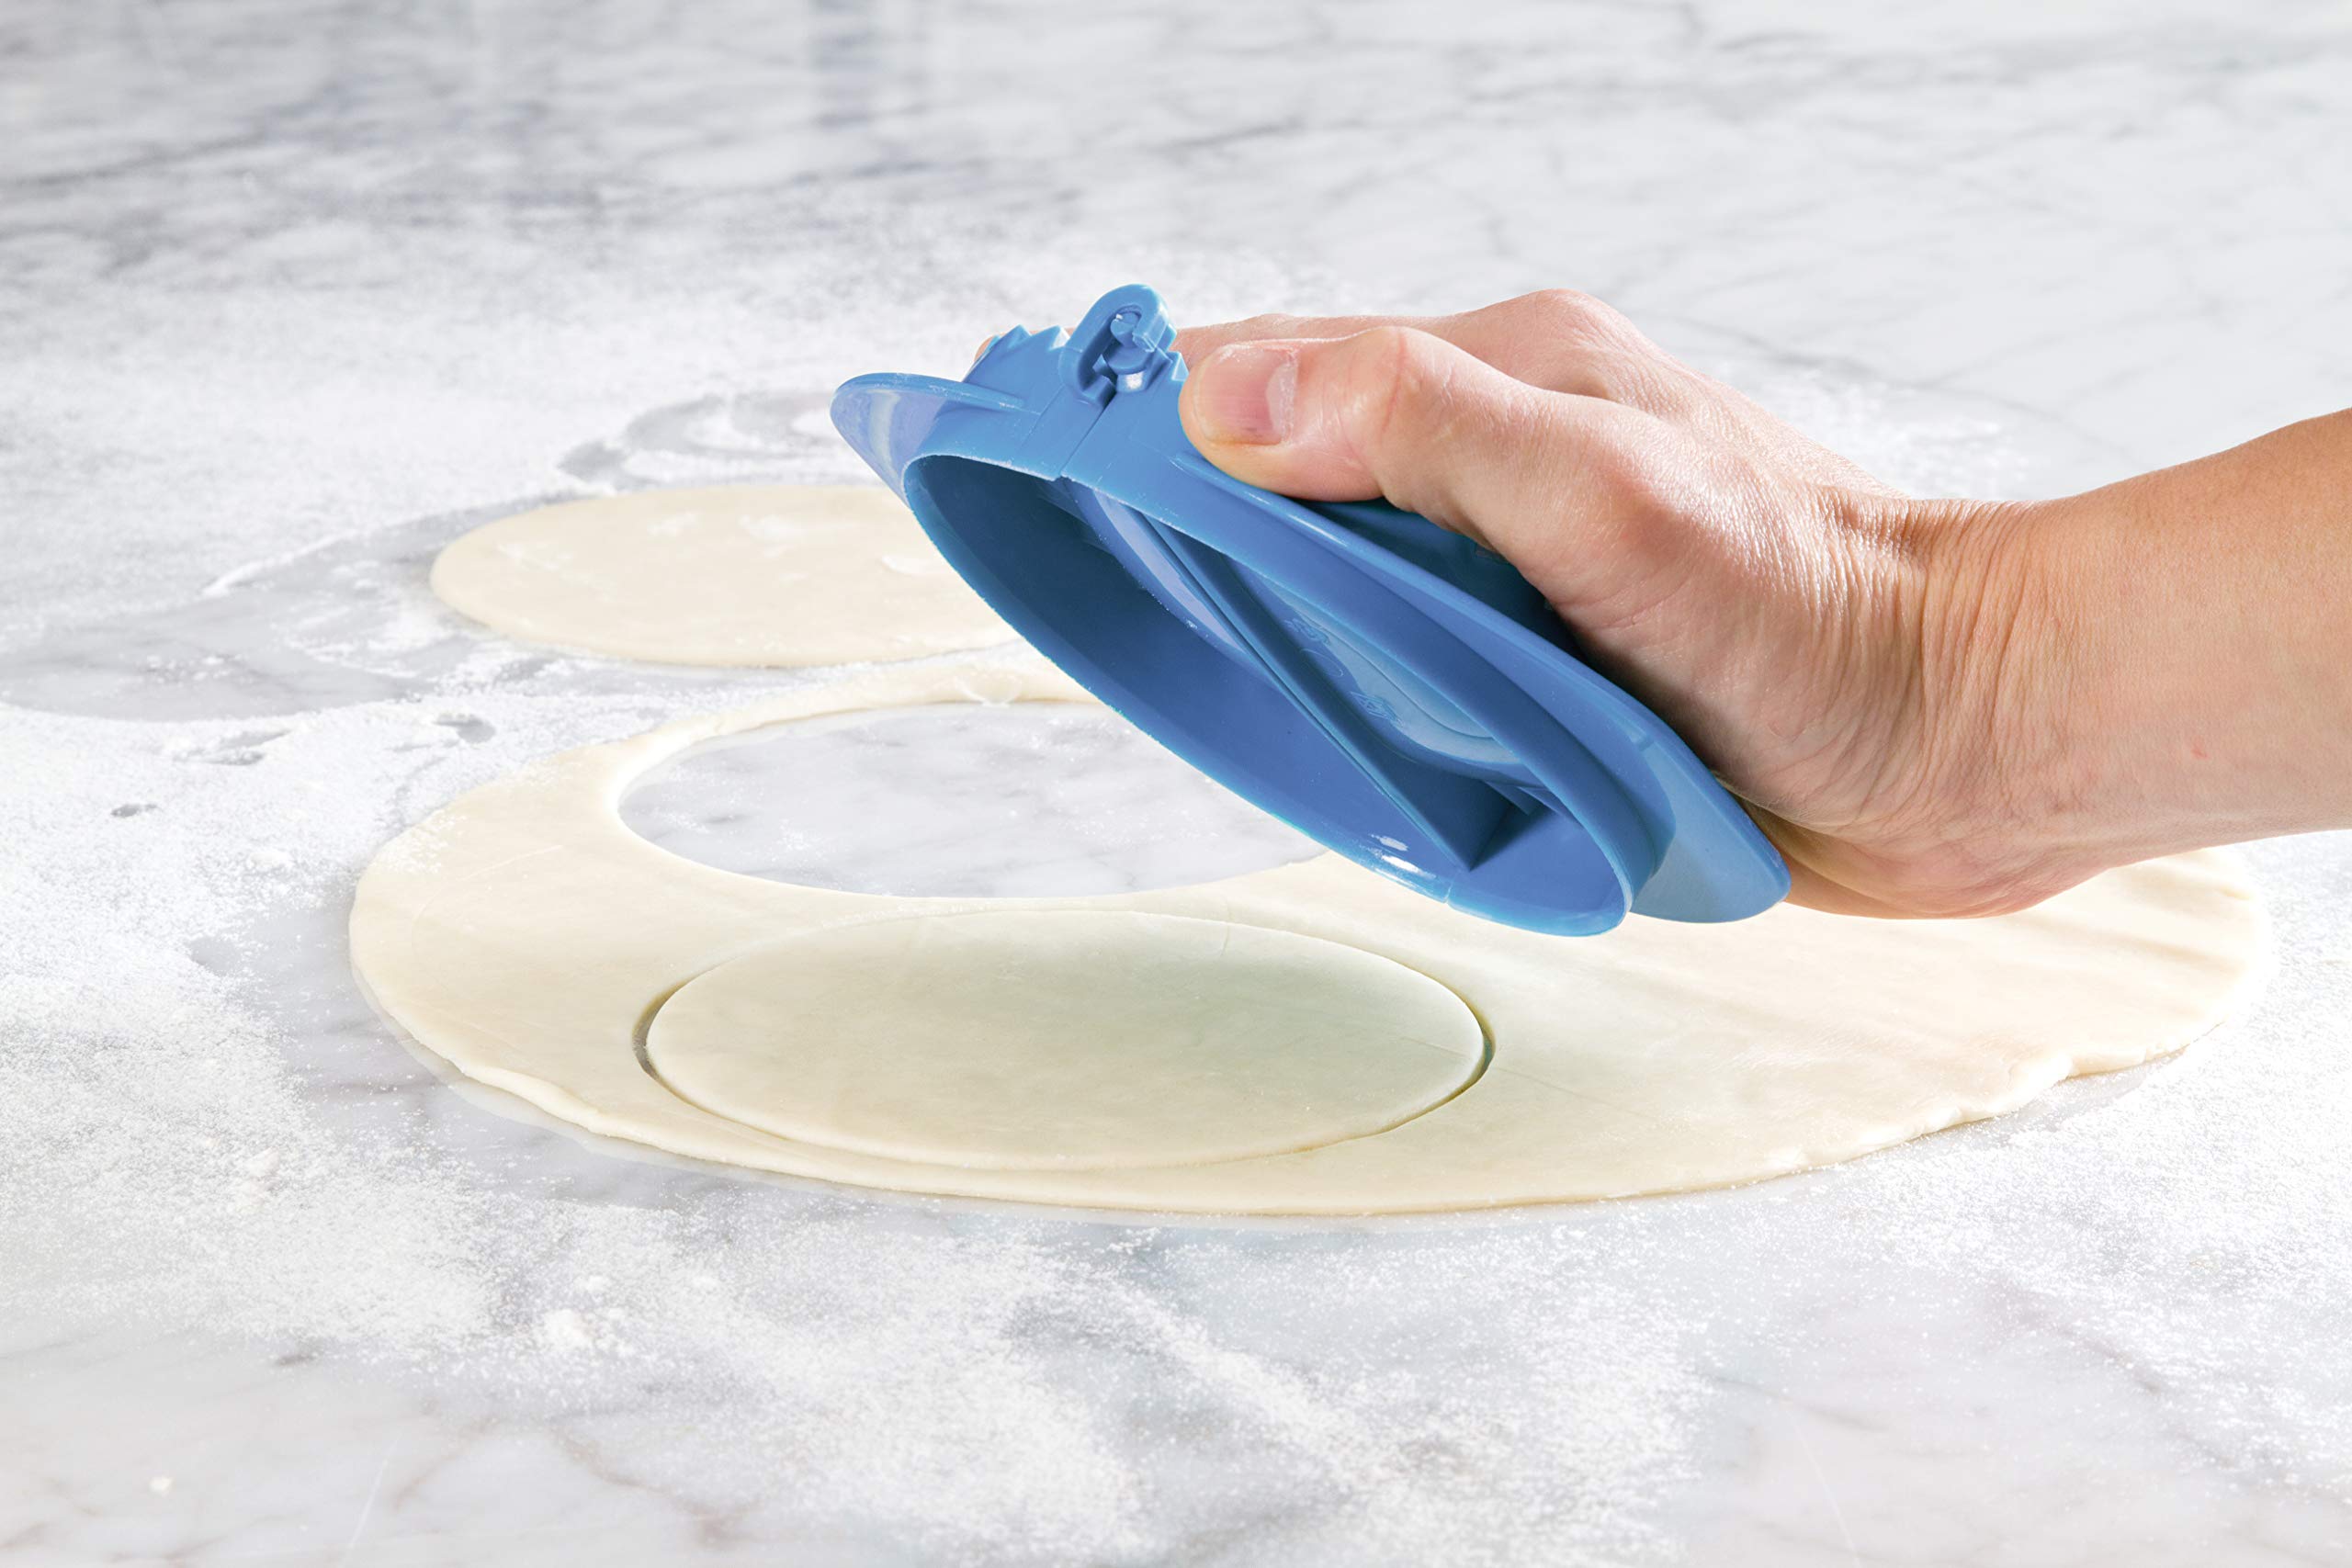 Prepworks Multifunctional Dough Press, Set of 3 Sizes Included - 4 inch/5 inch/6 inch